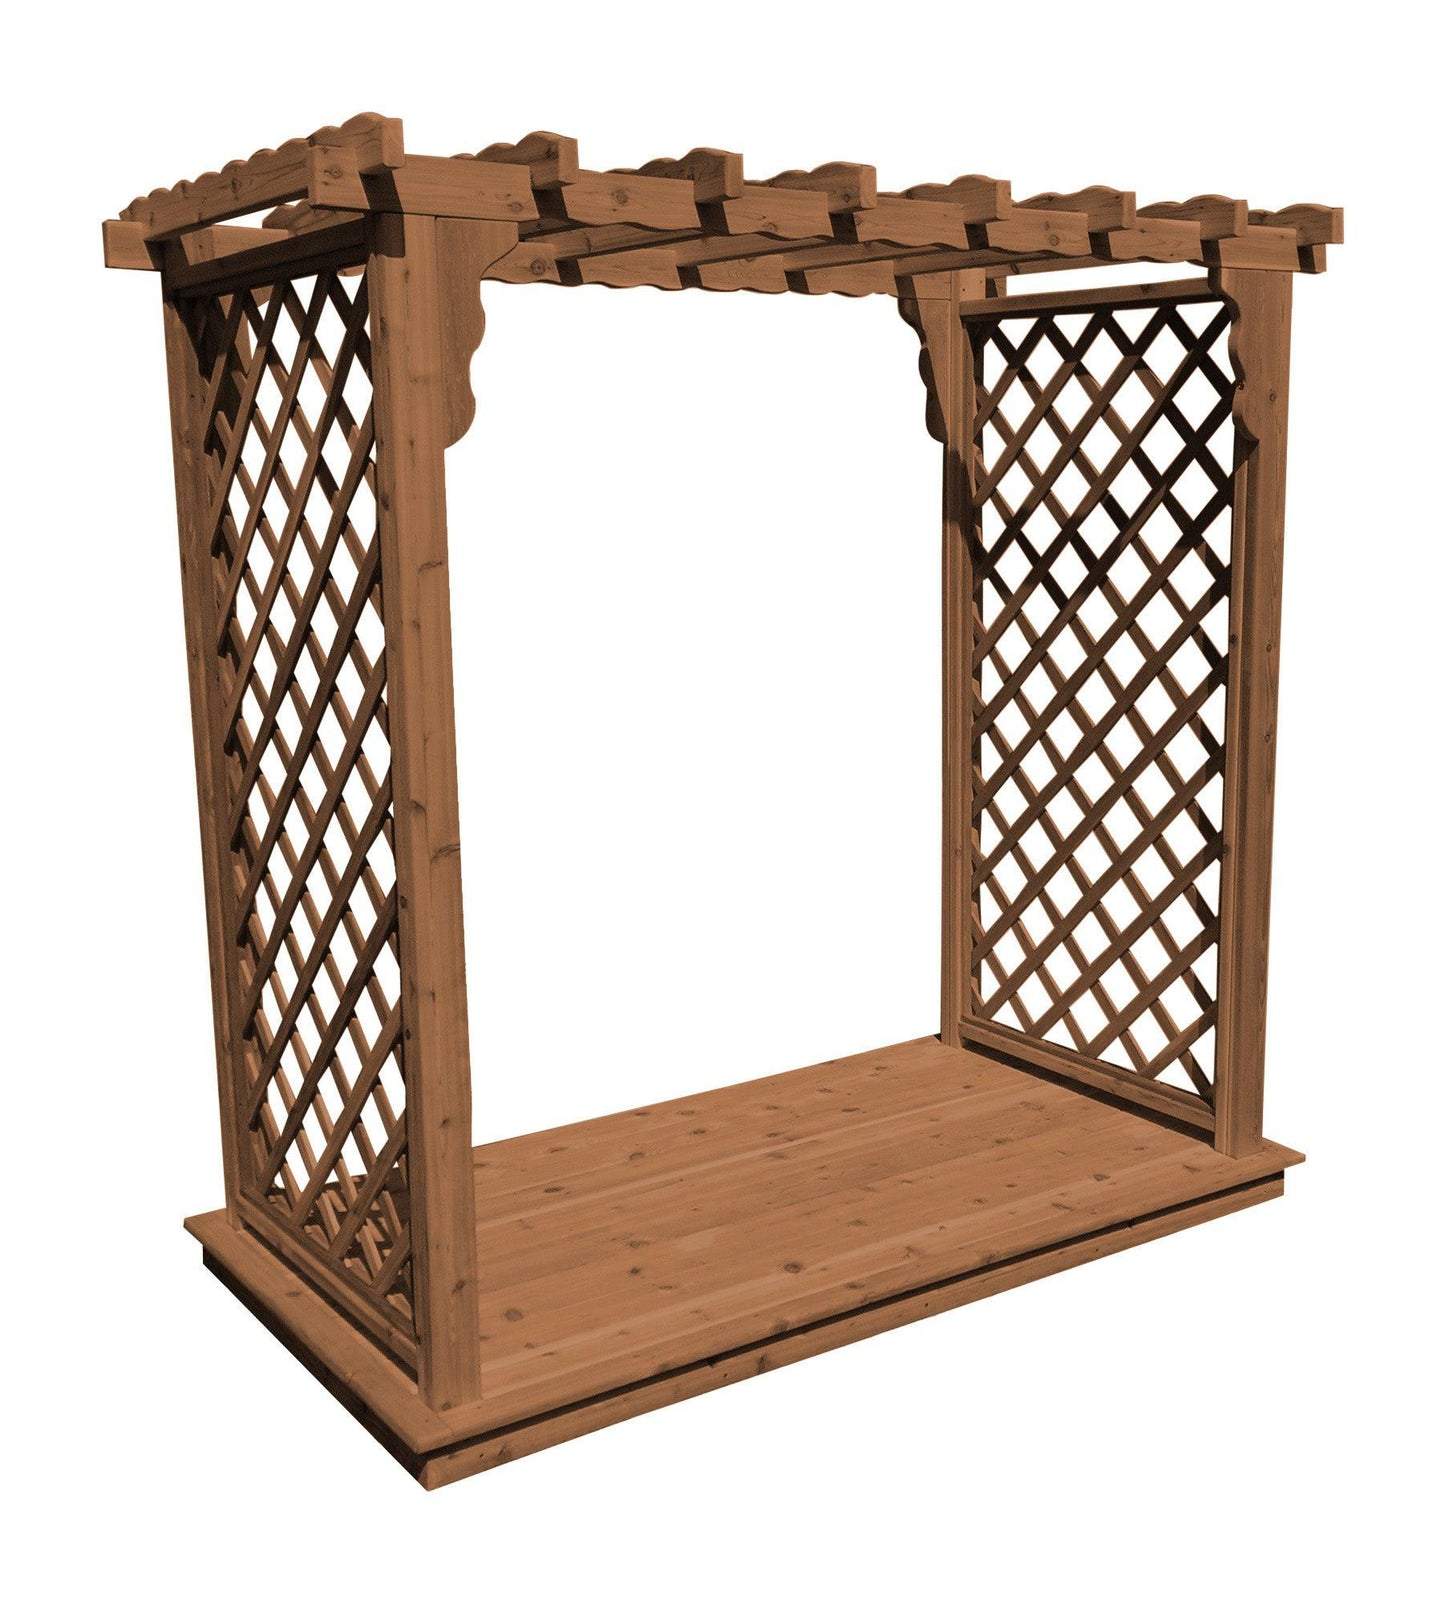 A&L Furniture Co. Western Red Cedar 6' Covington Arbor & Deck - LEAD TIME TO SHIP 2 WEEKS